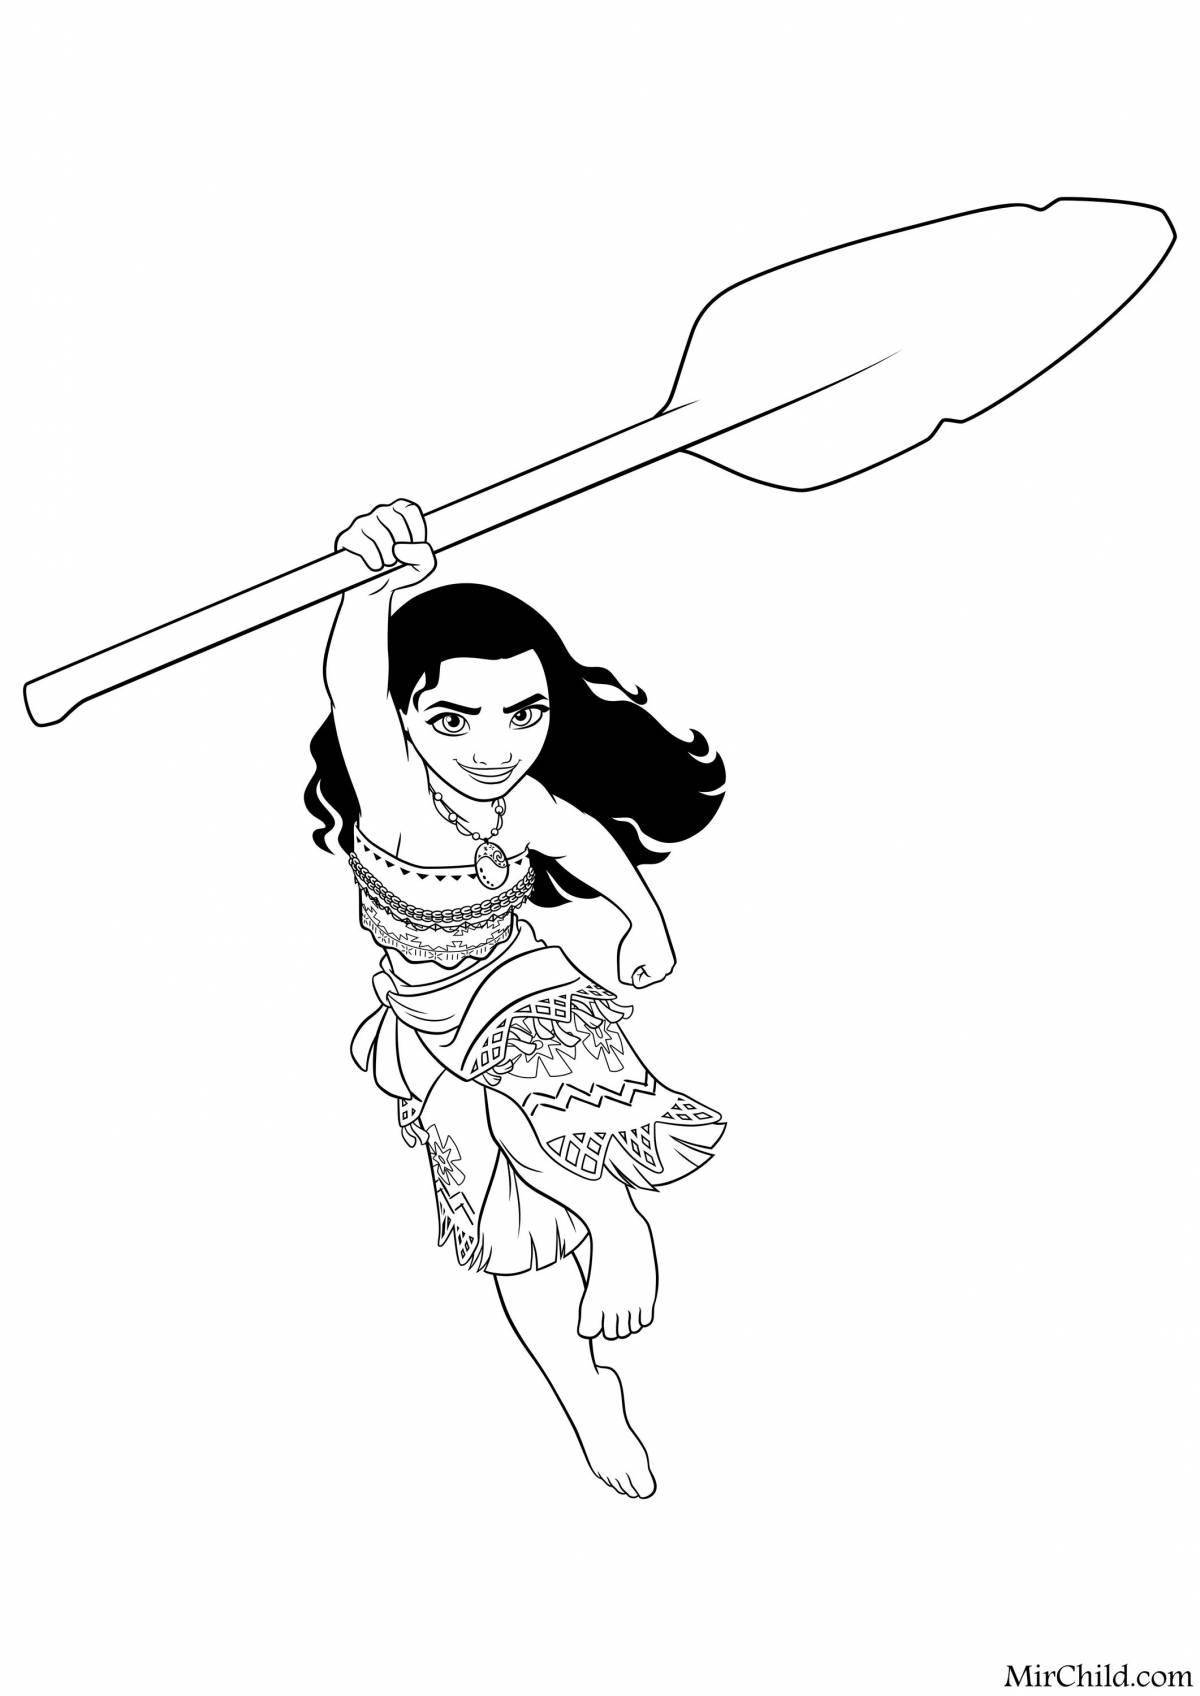 Animated maui coloring page